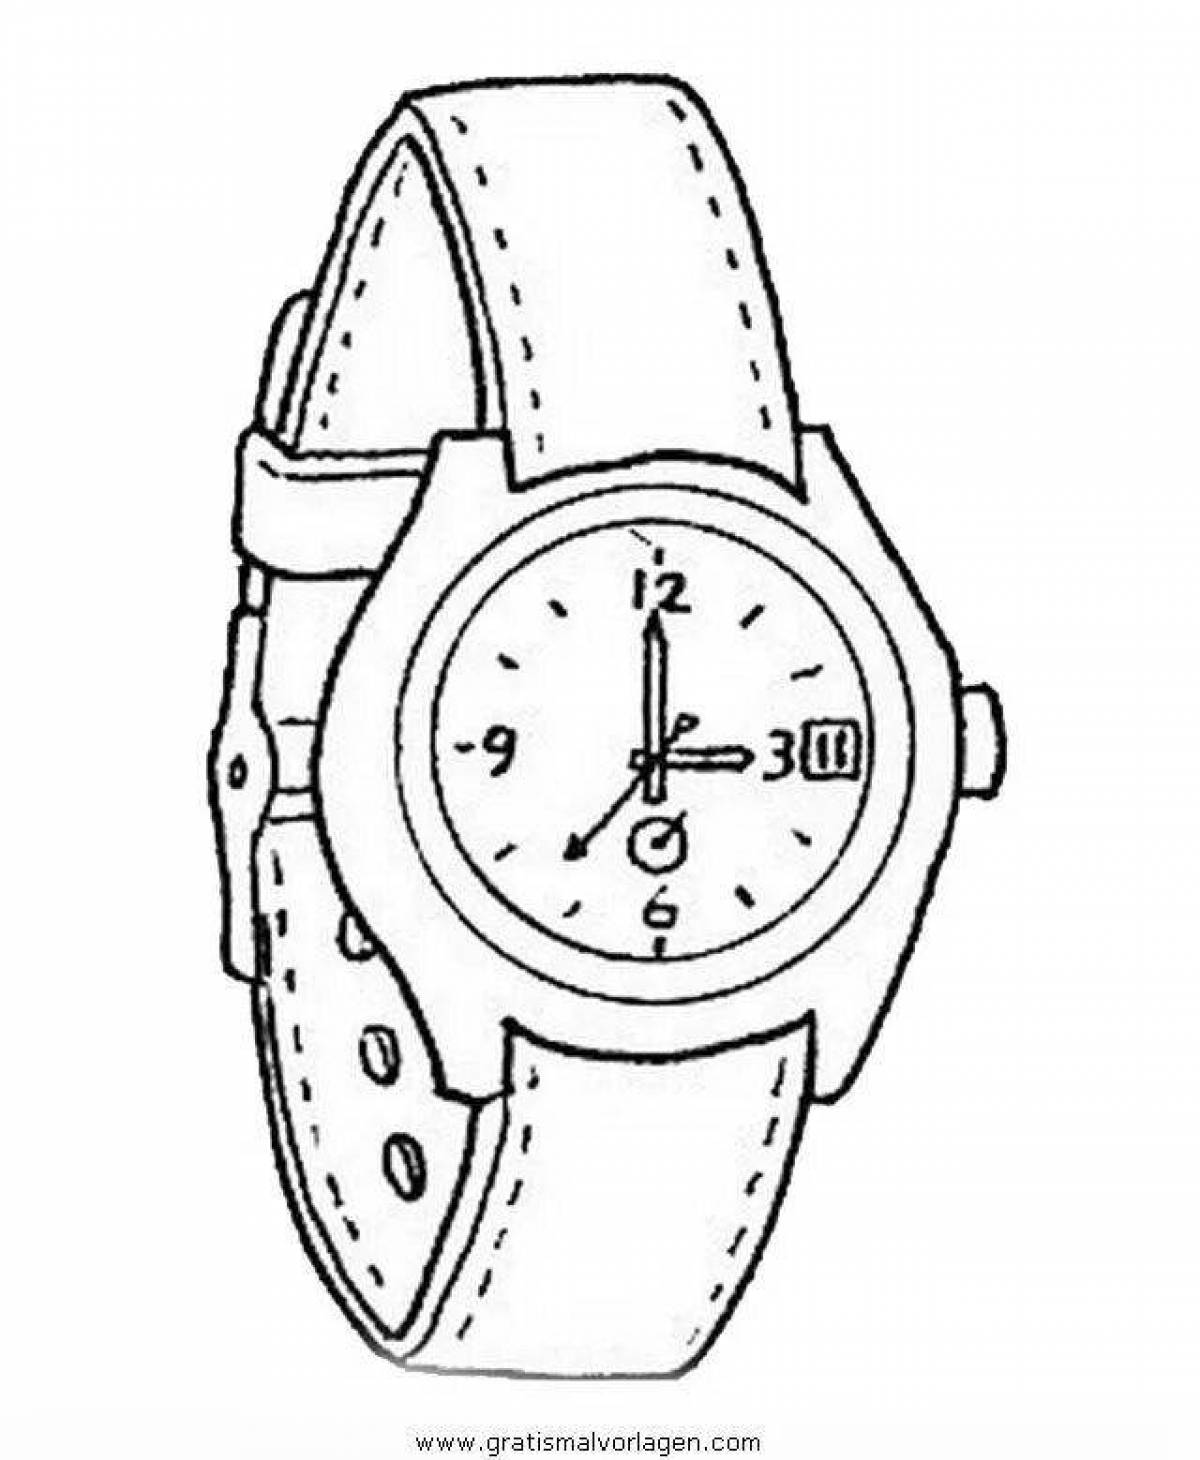 Coloring book dazzling wrist watch